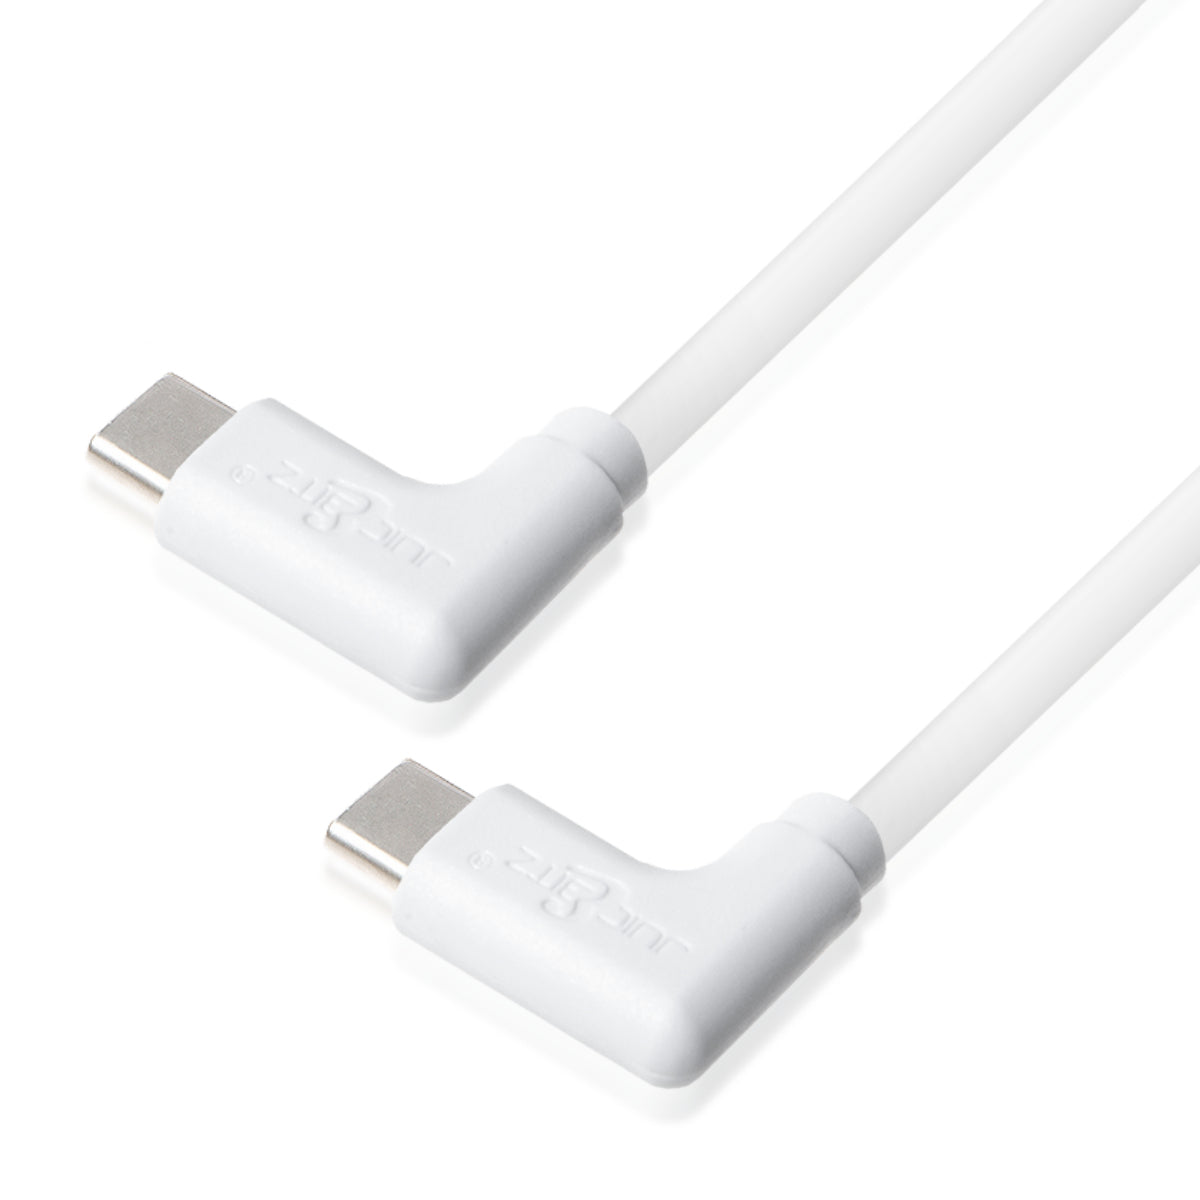 USB-C to USB-C Angled 3A Charger Cable USB 2.0 Data Transfer Lead - White